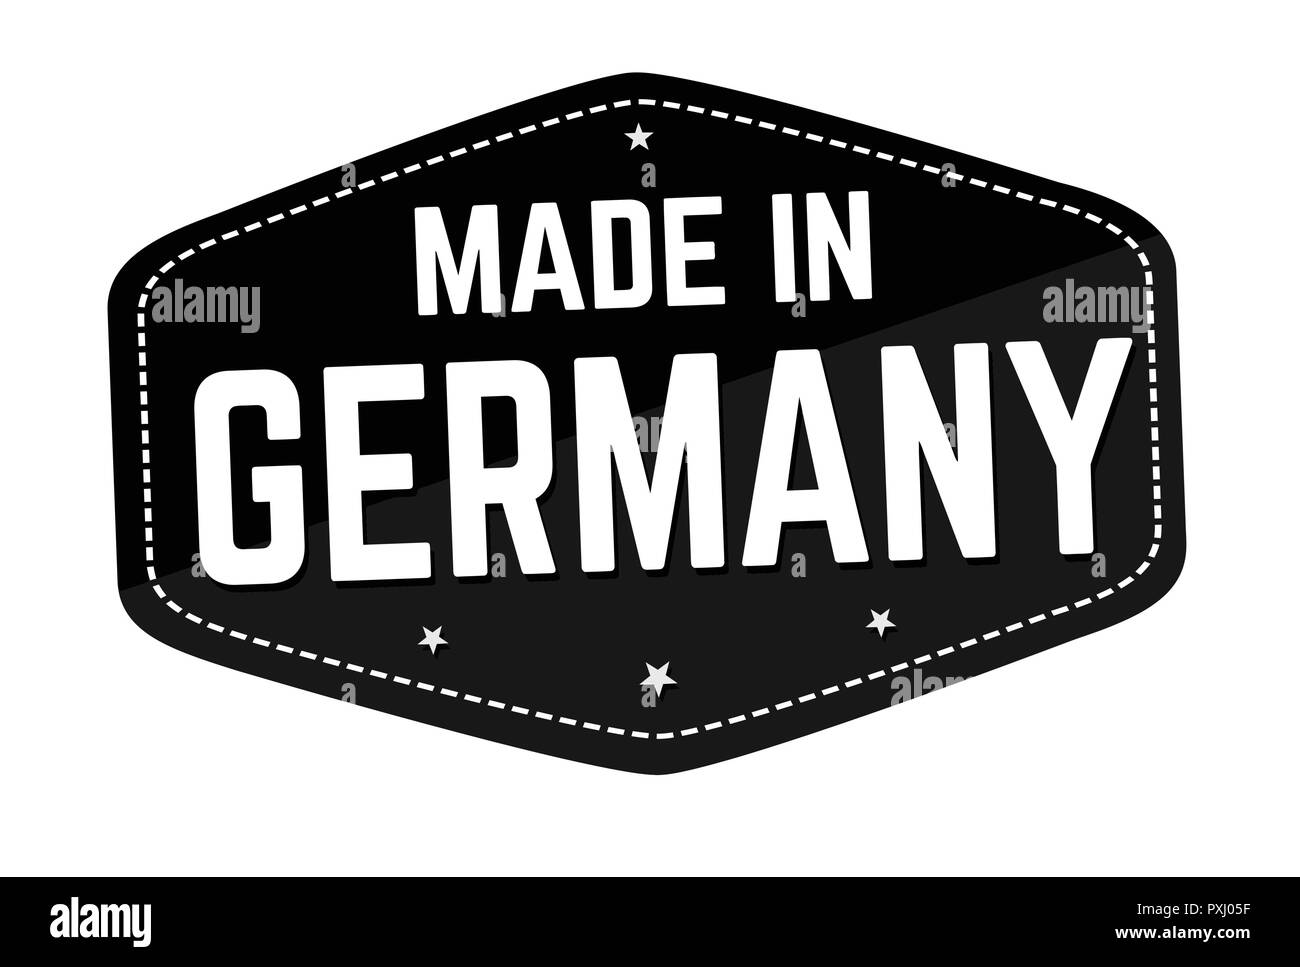 Made in Germany label or sticker on white background, vector illustration Stock Vector